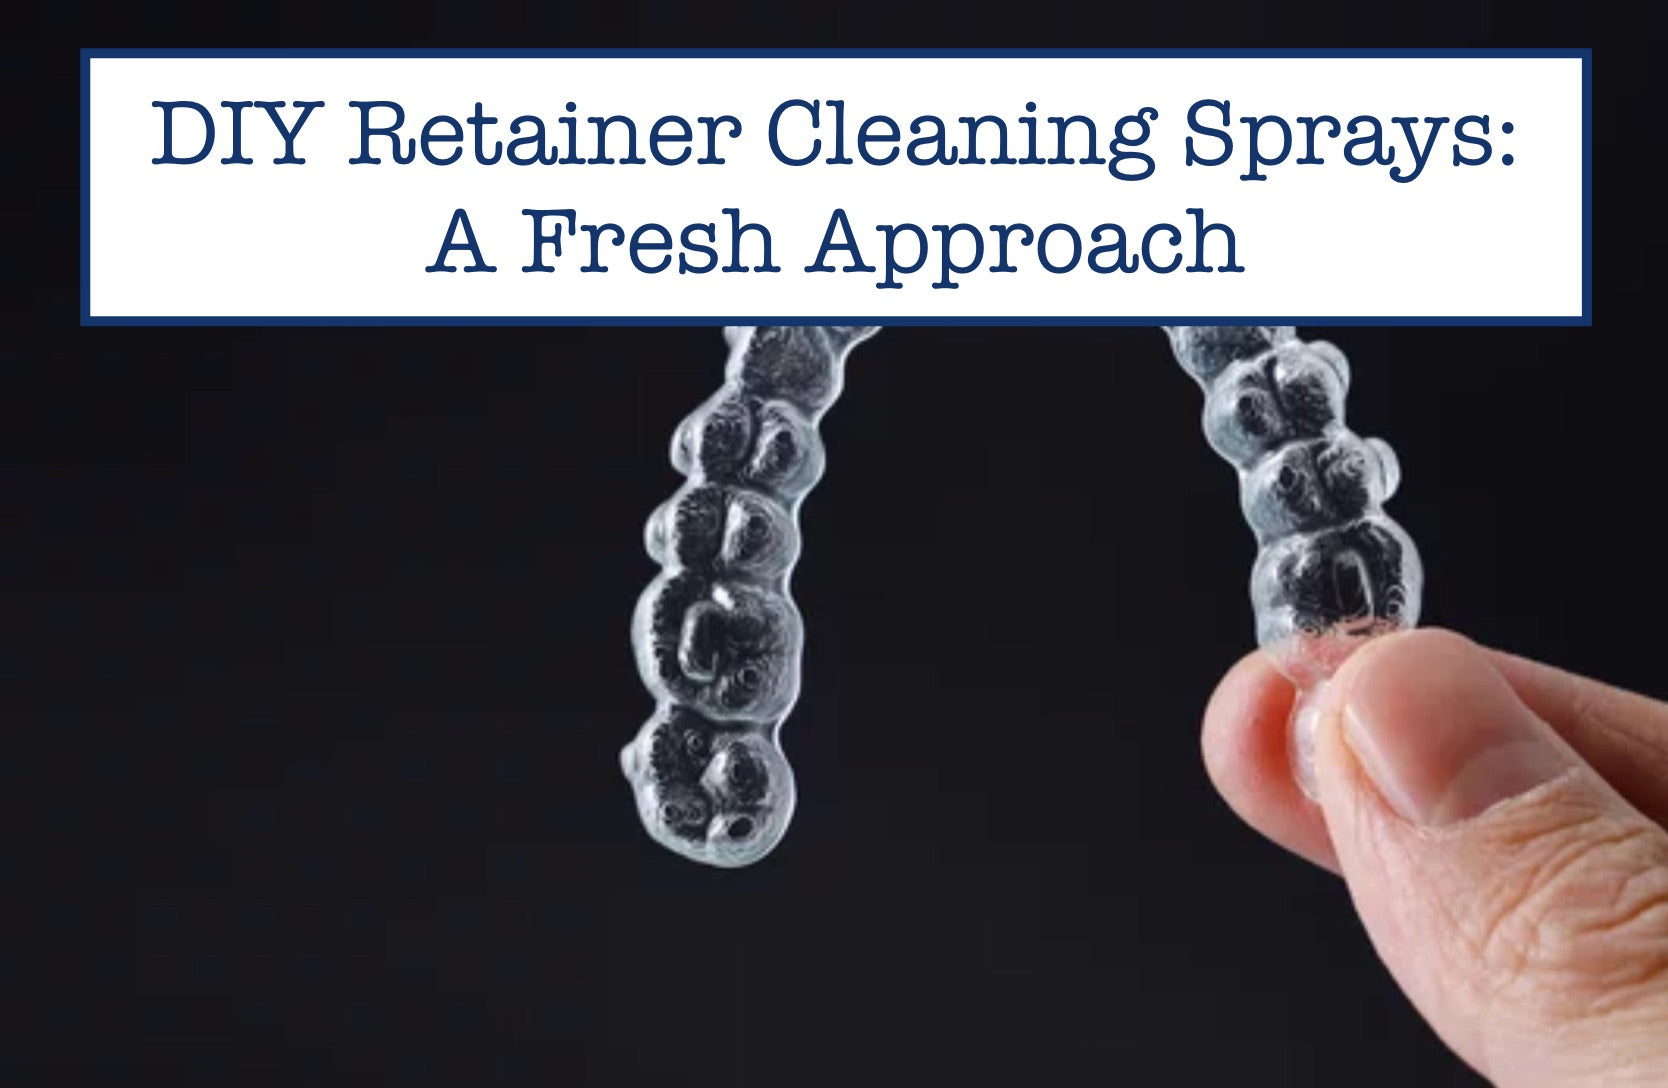 DIY Retainer Cleaning Sprays: A Fresh Approach